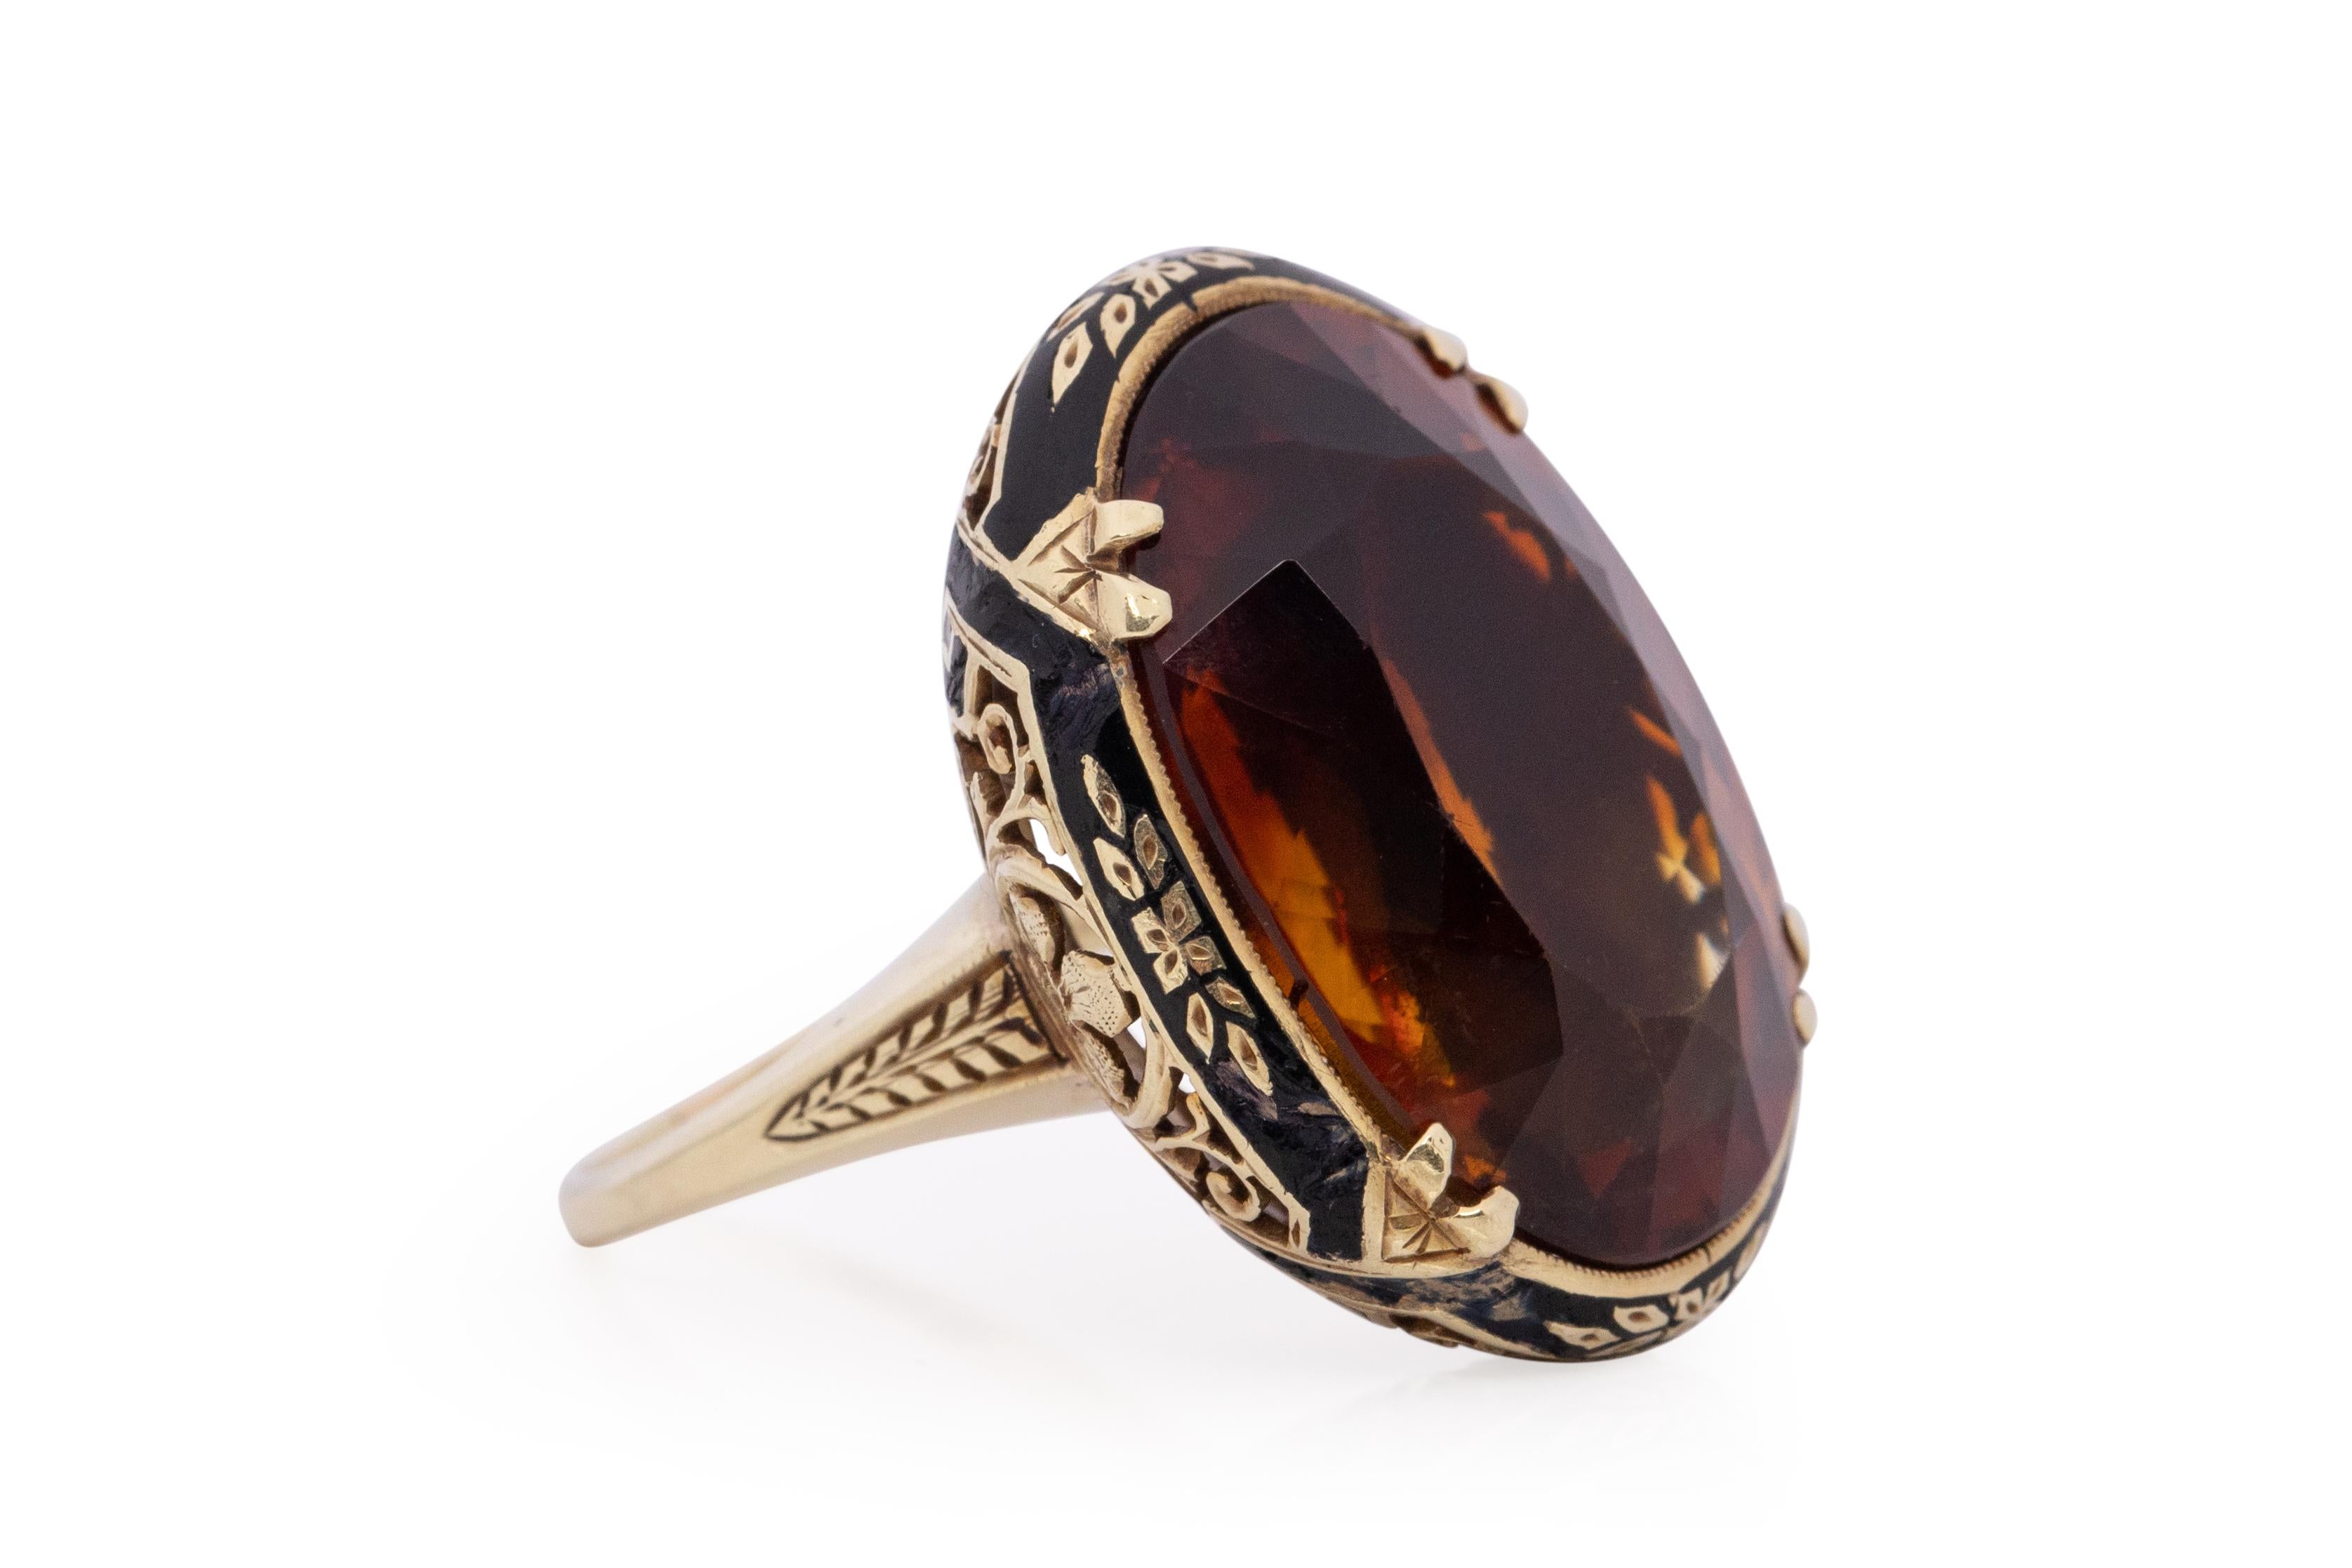 Item Details: 
Ring Size: 6.5
Metal Type: 14 Karat Yellow Gold [Hallmarked, and Tested]
Weight: 9.0 grams

Center Stone Details:
Type: Citrine, Natural, Dark Orangy Brown
Weight: 10 carat
Cut: Oval
Clarity: Central feather

Note: Beautiful enamel